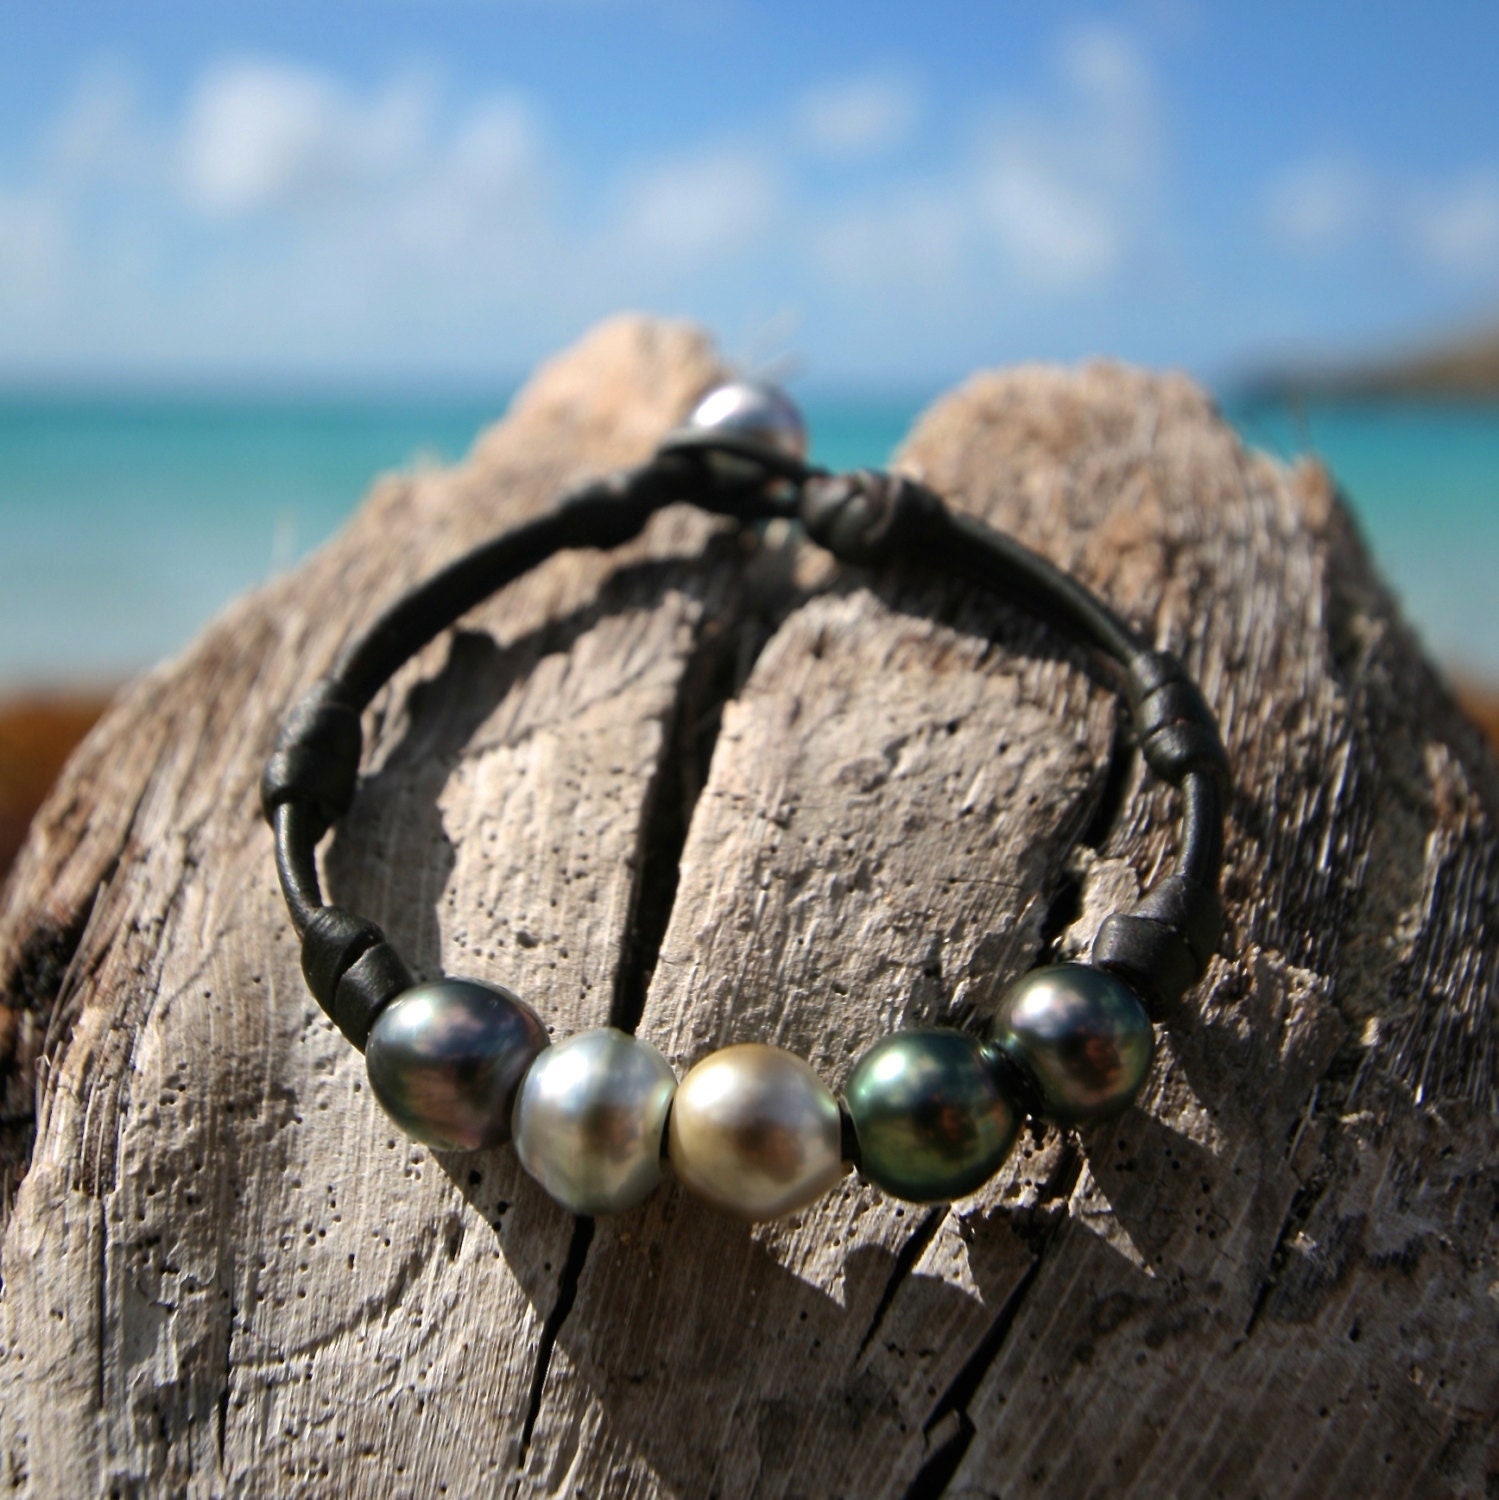 Double Leather Wrap Bracelet of Ancient African Trade Beads and 16 Tahitian Black Cultured Pearls, St Barts Jewelry, Seaside, Island Style